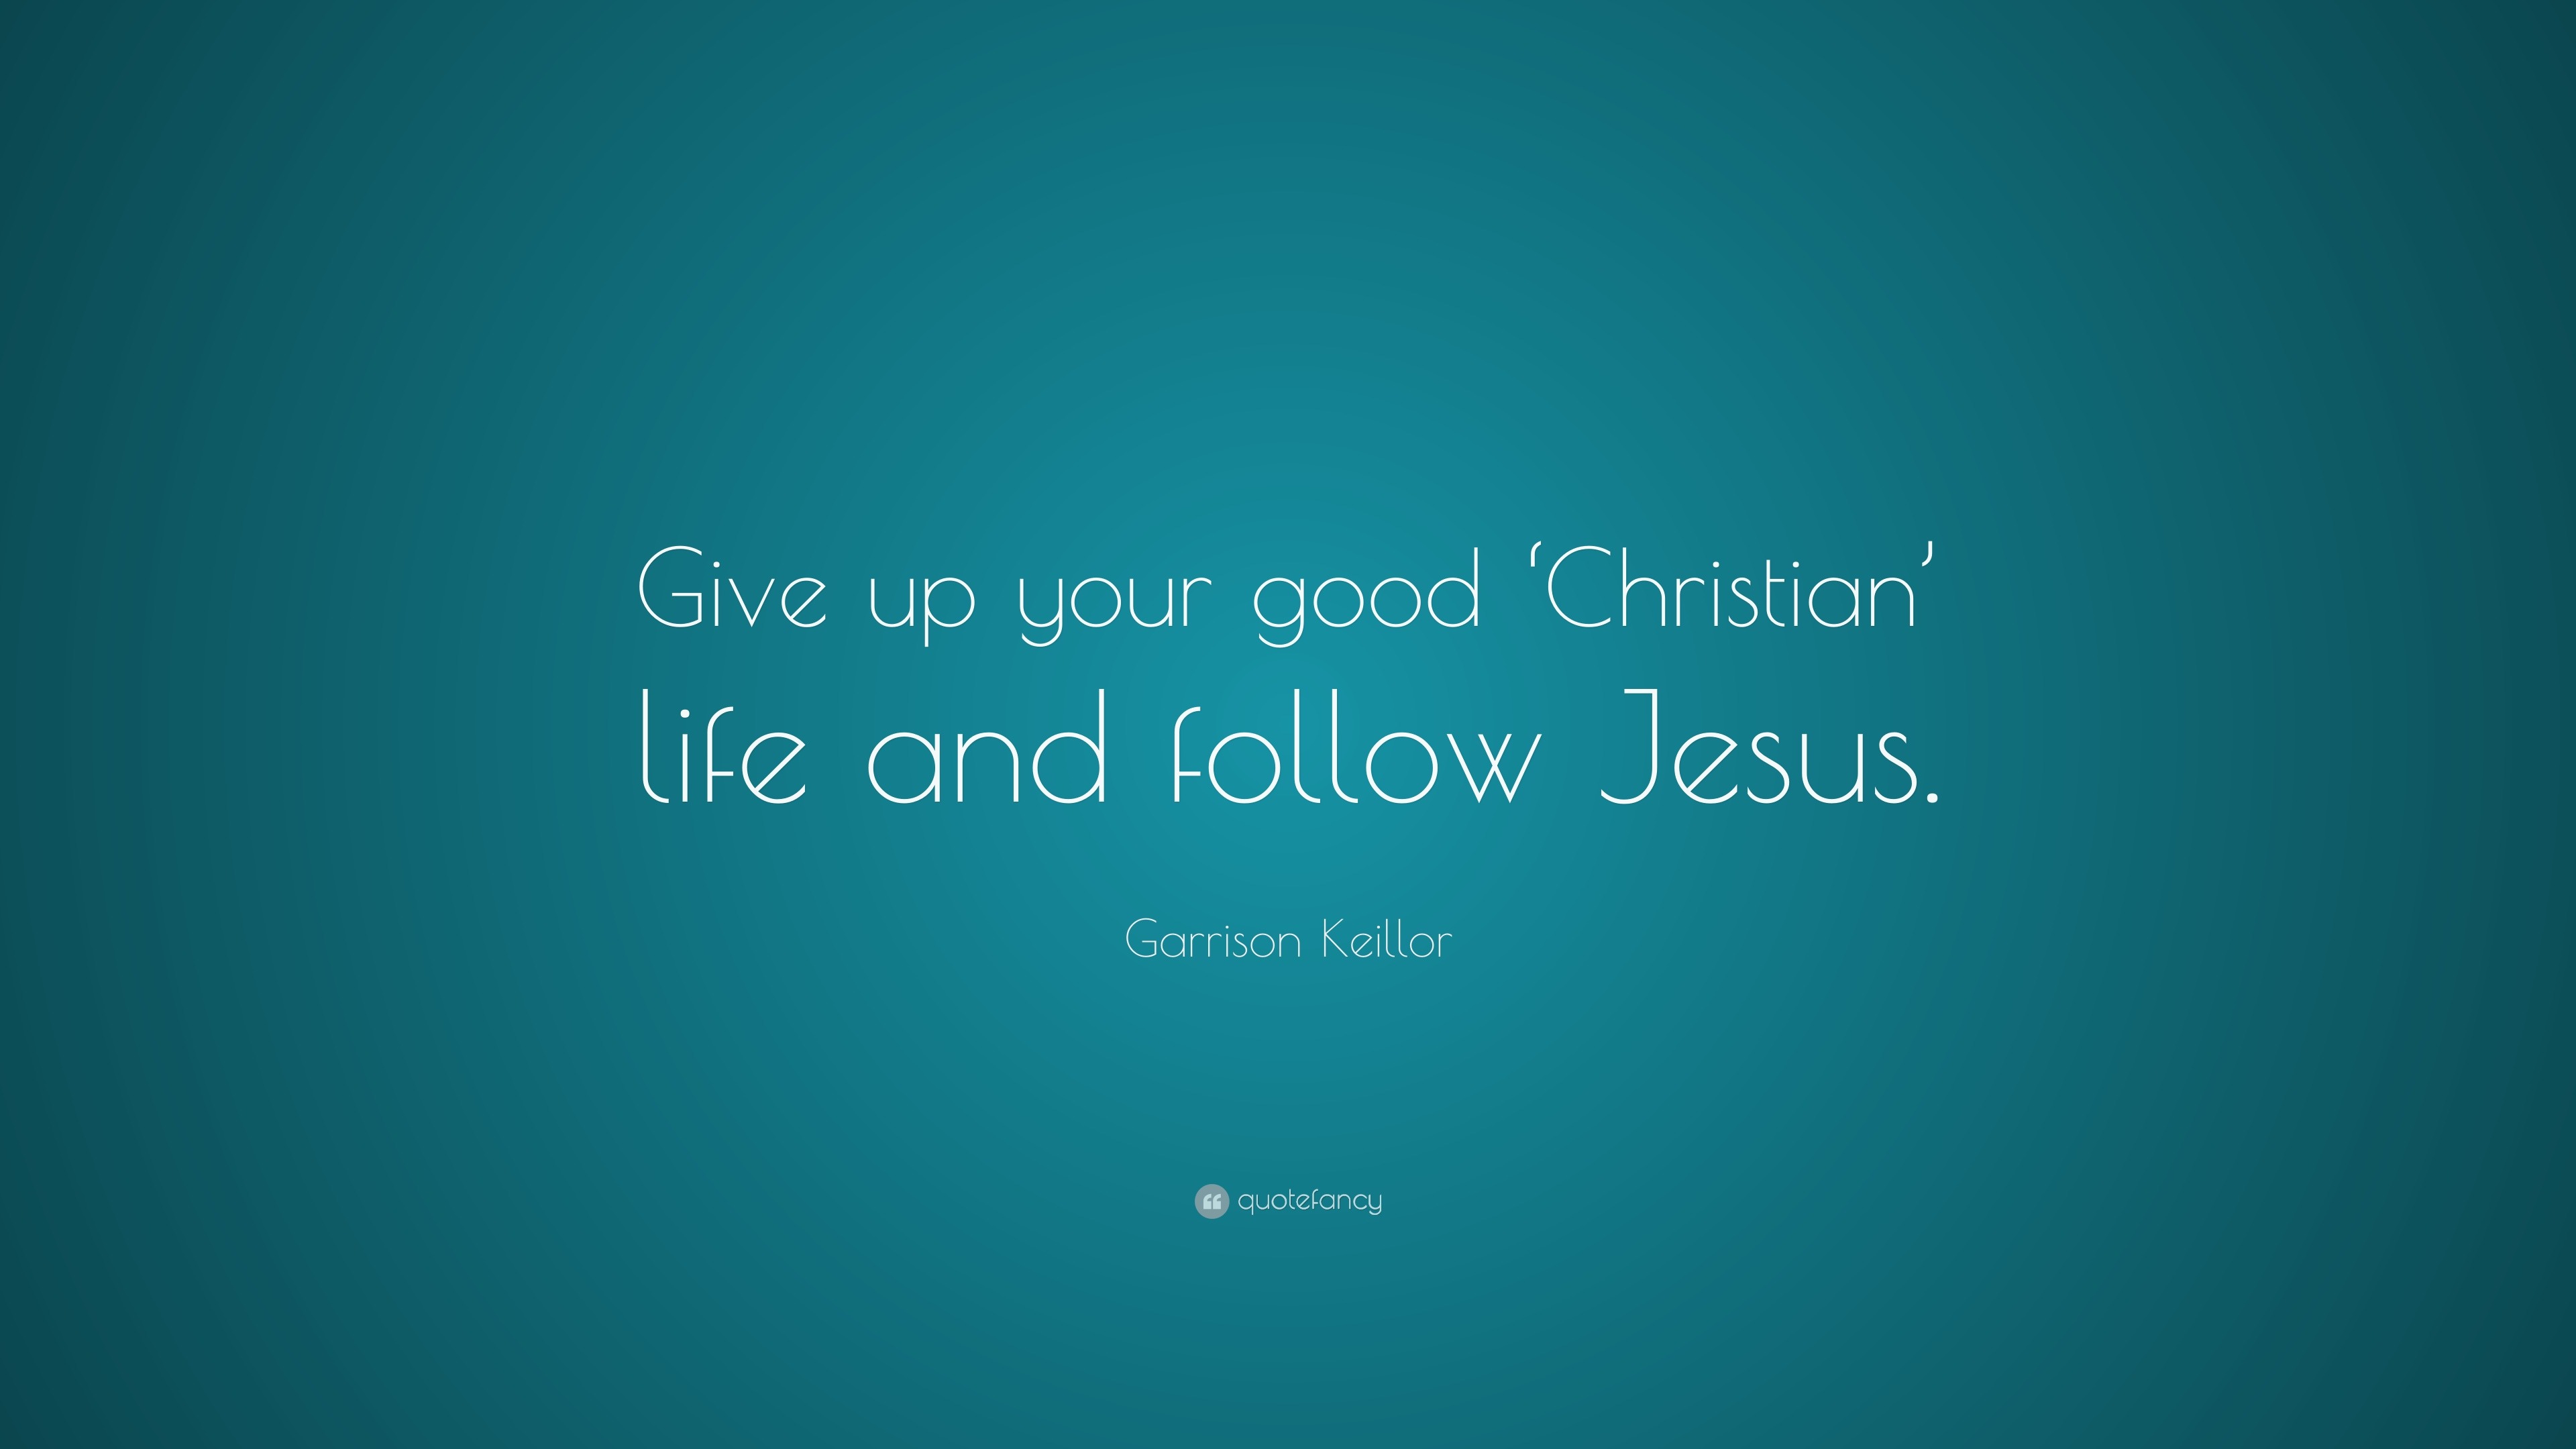 Garrison Keillor Quote “Give up your good Christian life and follow Jesus